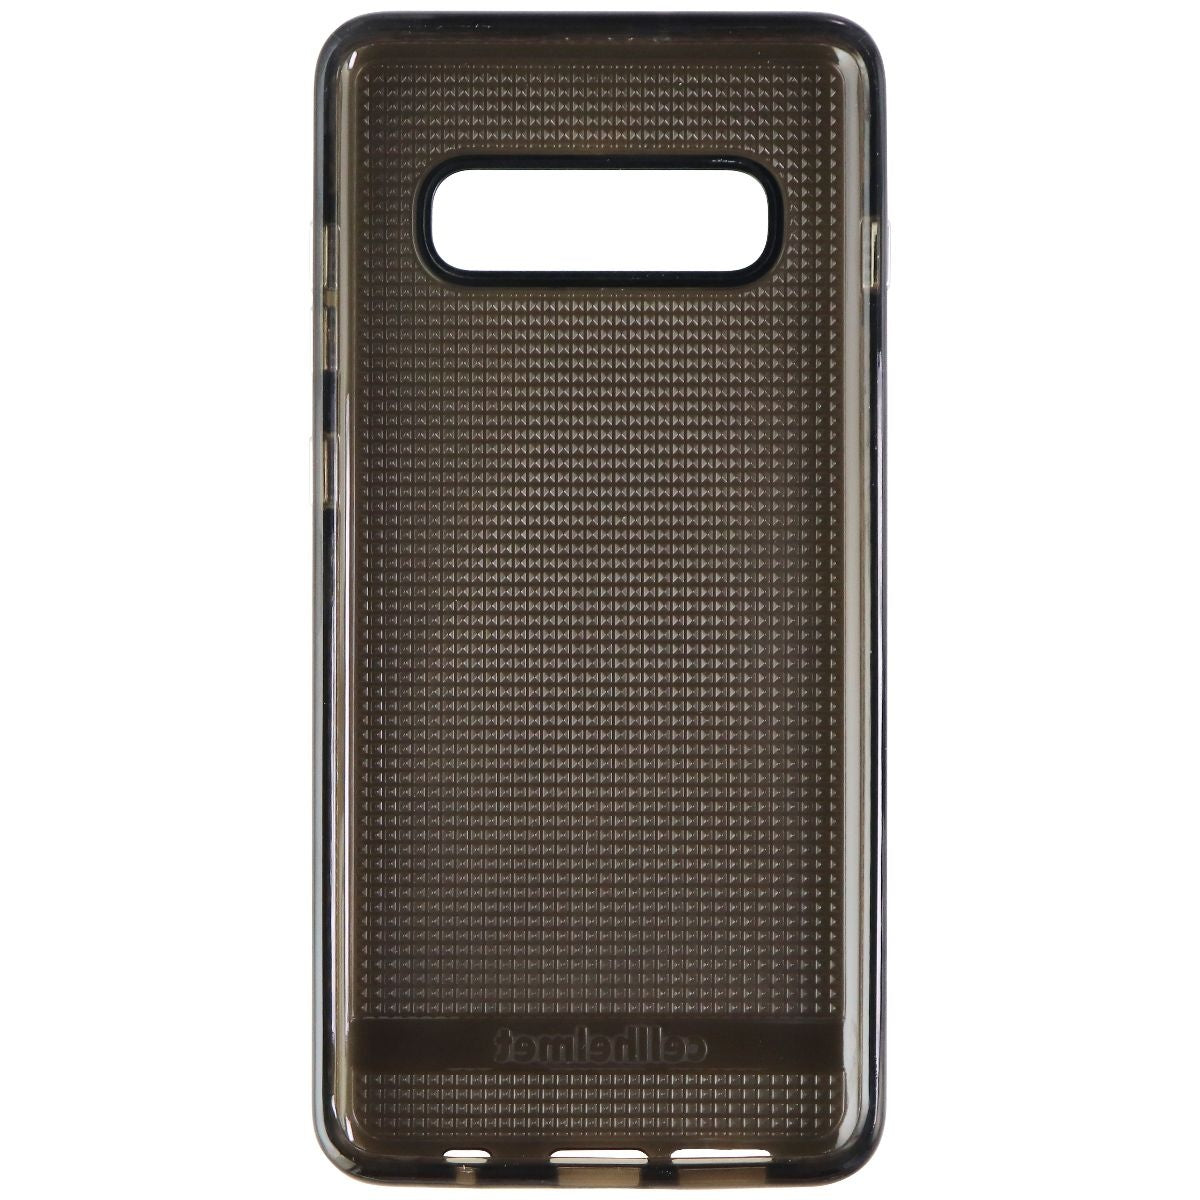 DO NOT USE - Check SC-Z13219 Family Cell Phone - Cases, Covers & Skins CellHelmet    - Simple Cell Bulk Wholesale Pricing - USA Seller